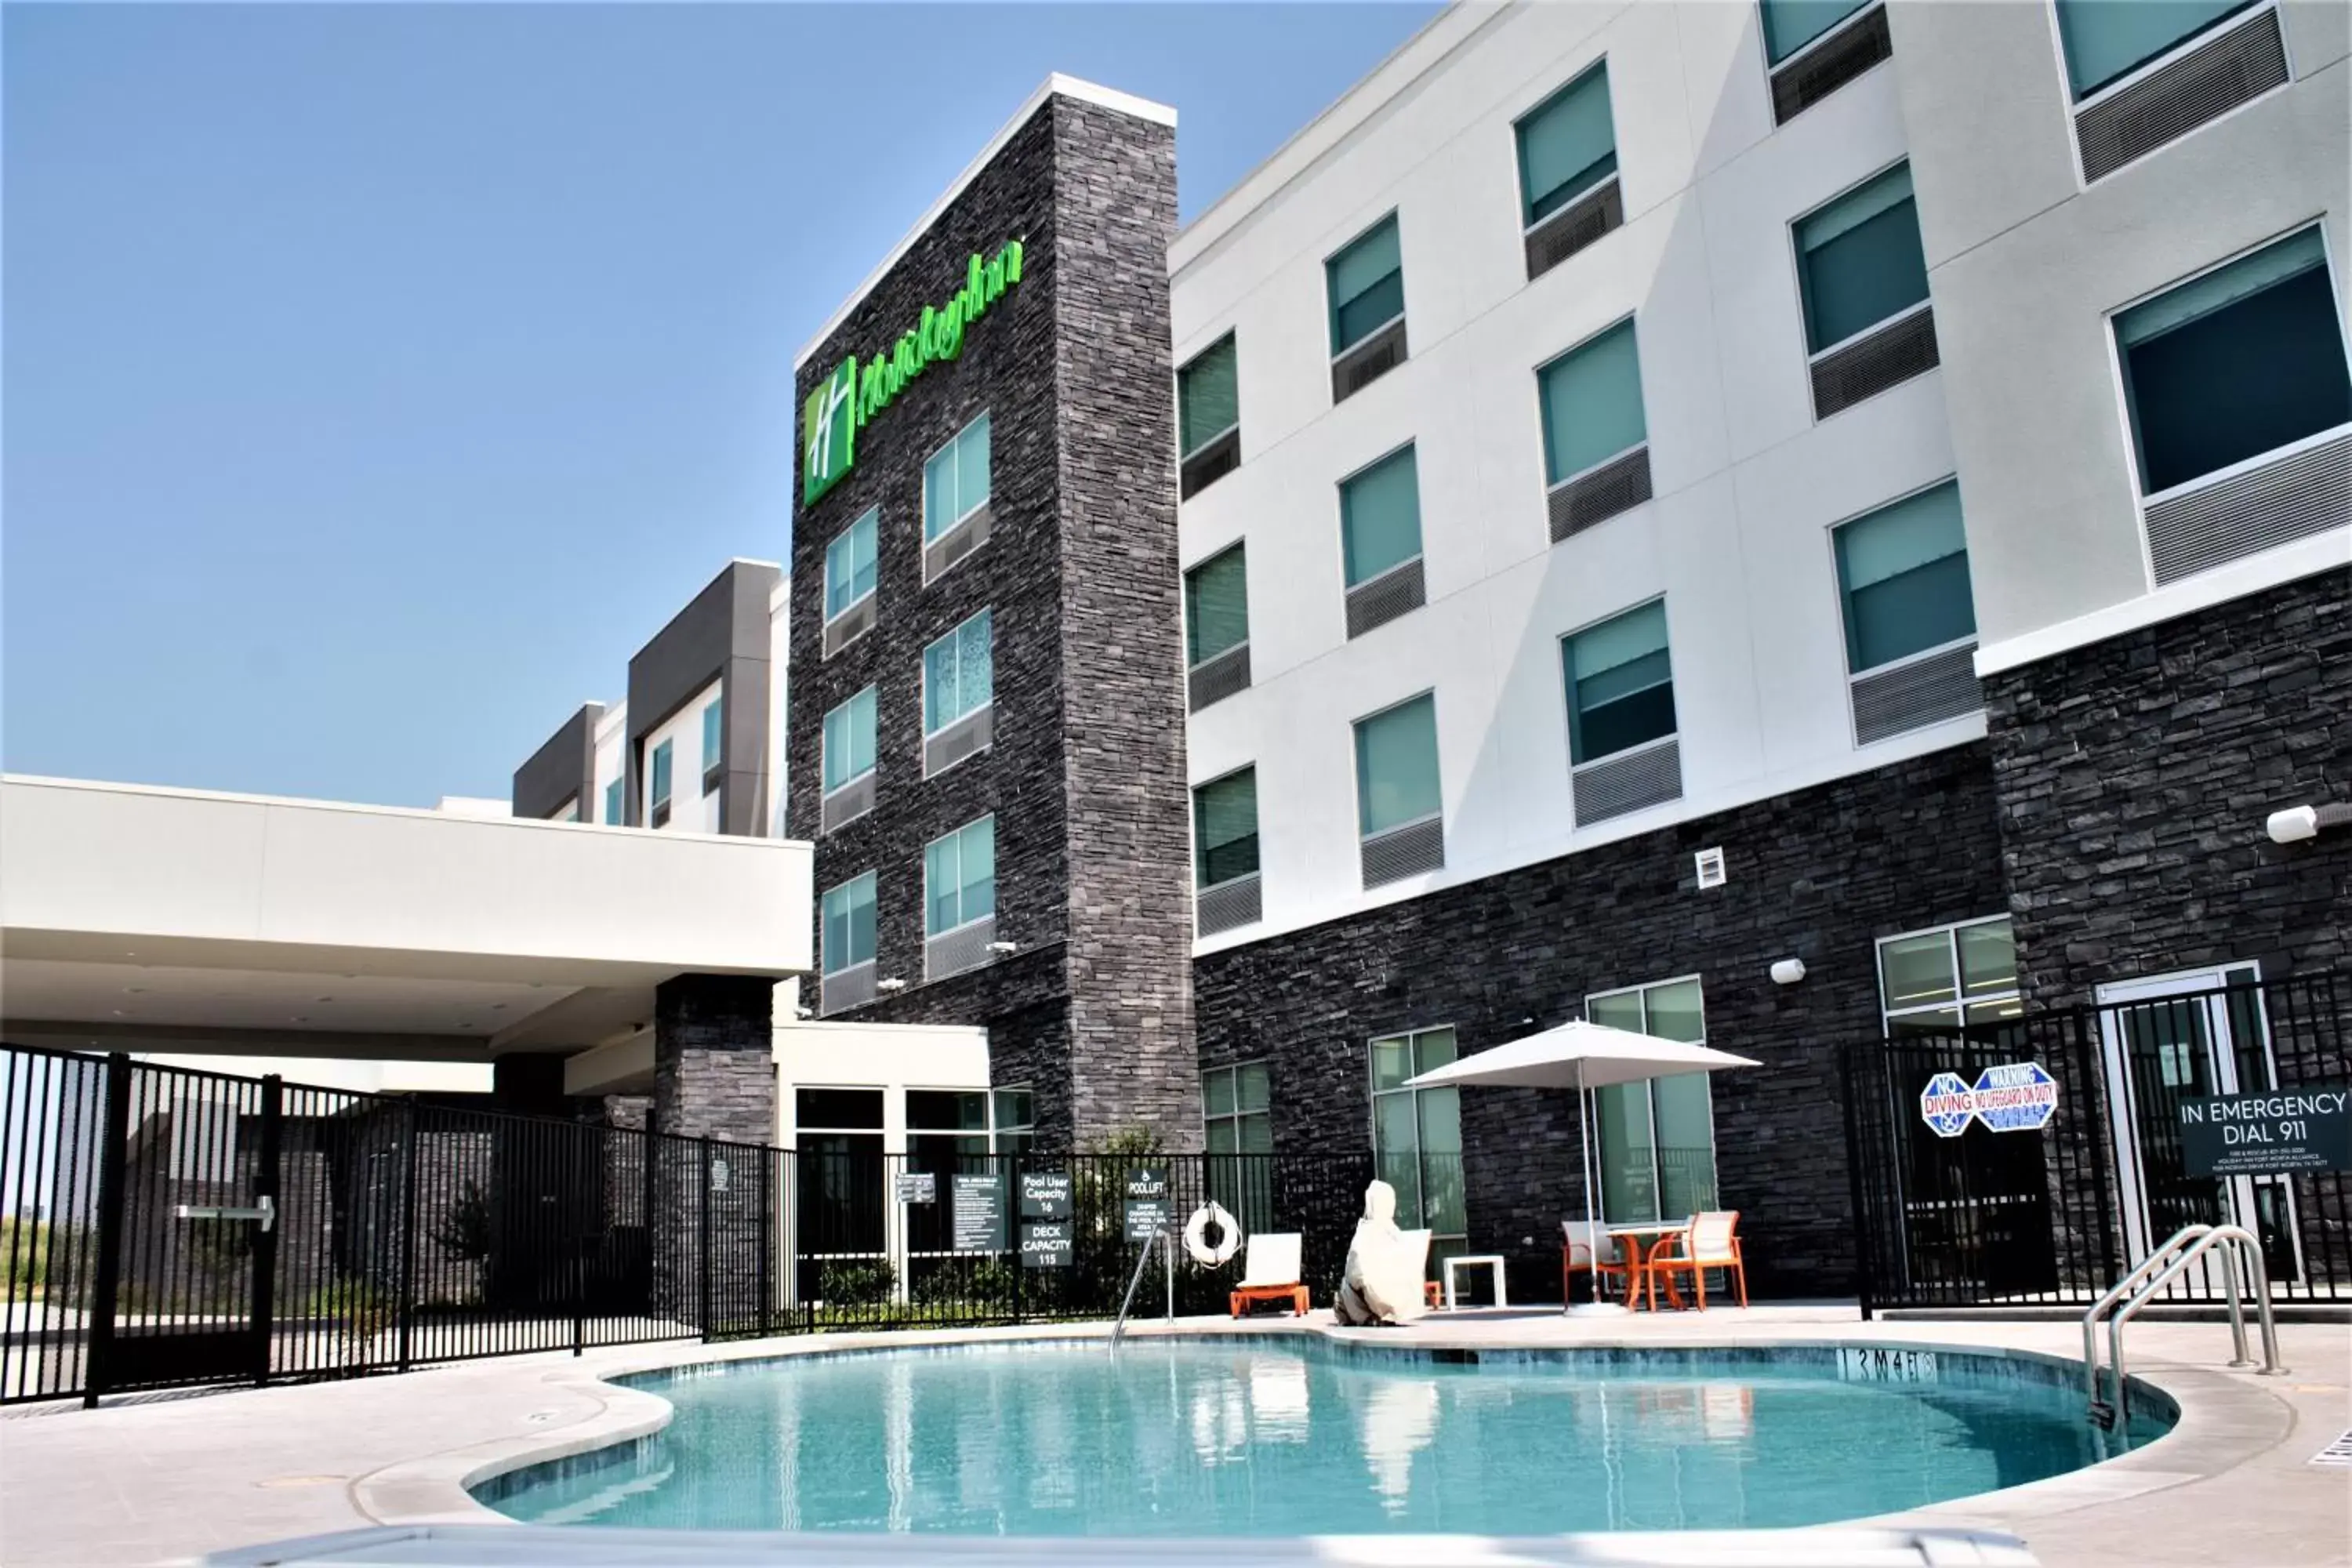 Swimming pool, Property Building in Holiday Inn - Fort Worth - Alliance, an IHG Hotel